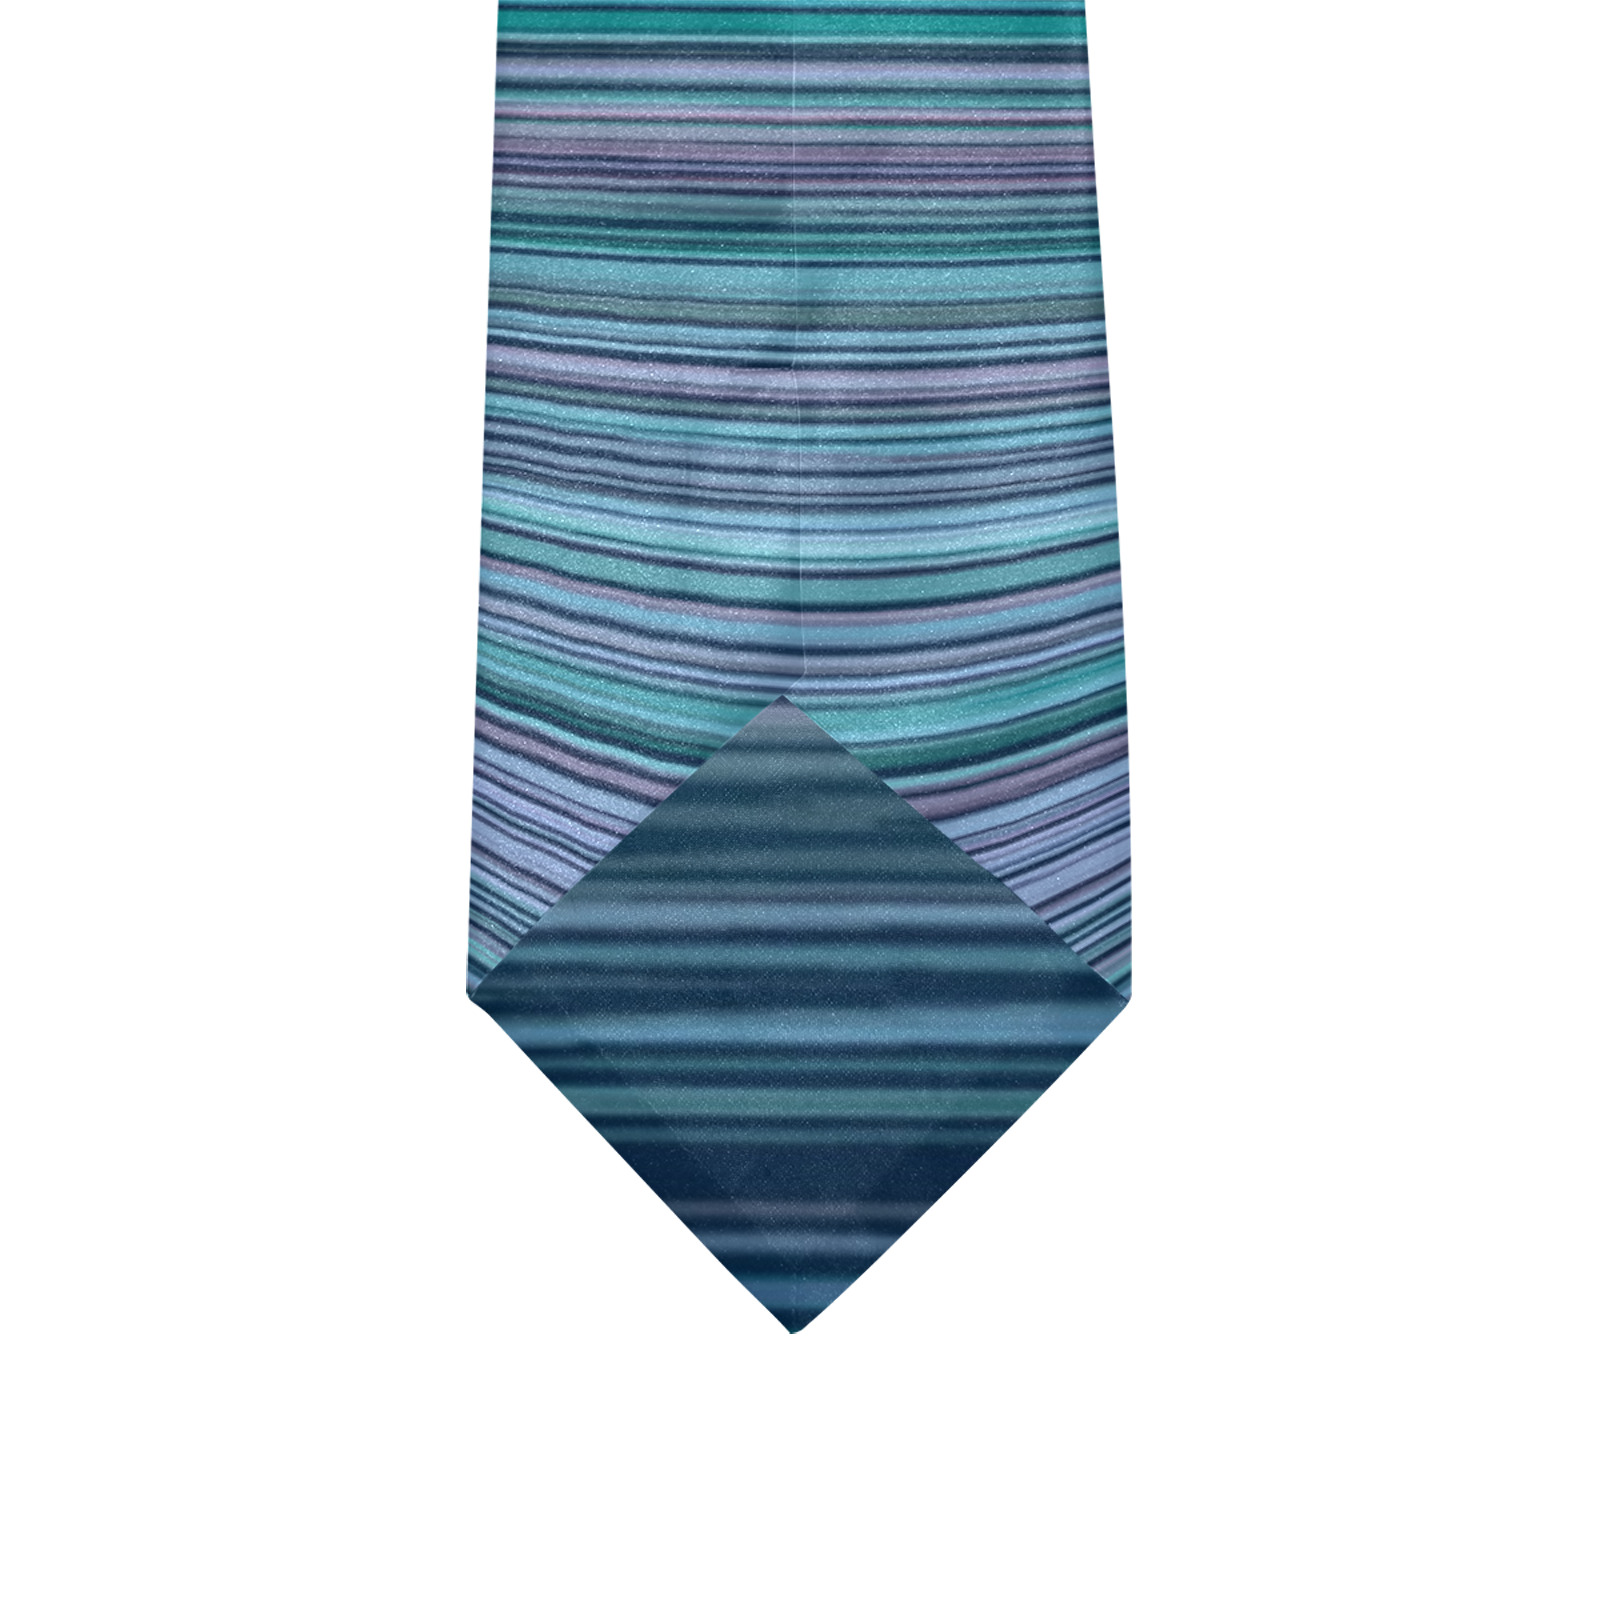 Abstract Blue Horizontal Stripes Custom Peekaboo Tie with Hidden Picture